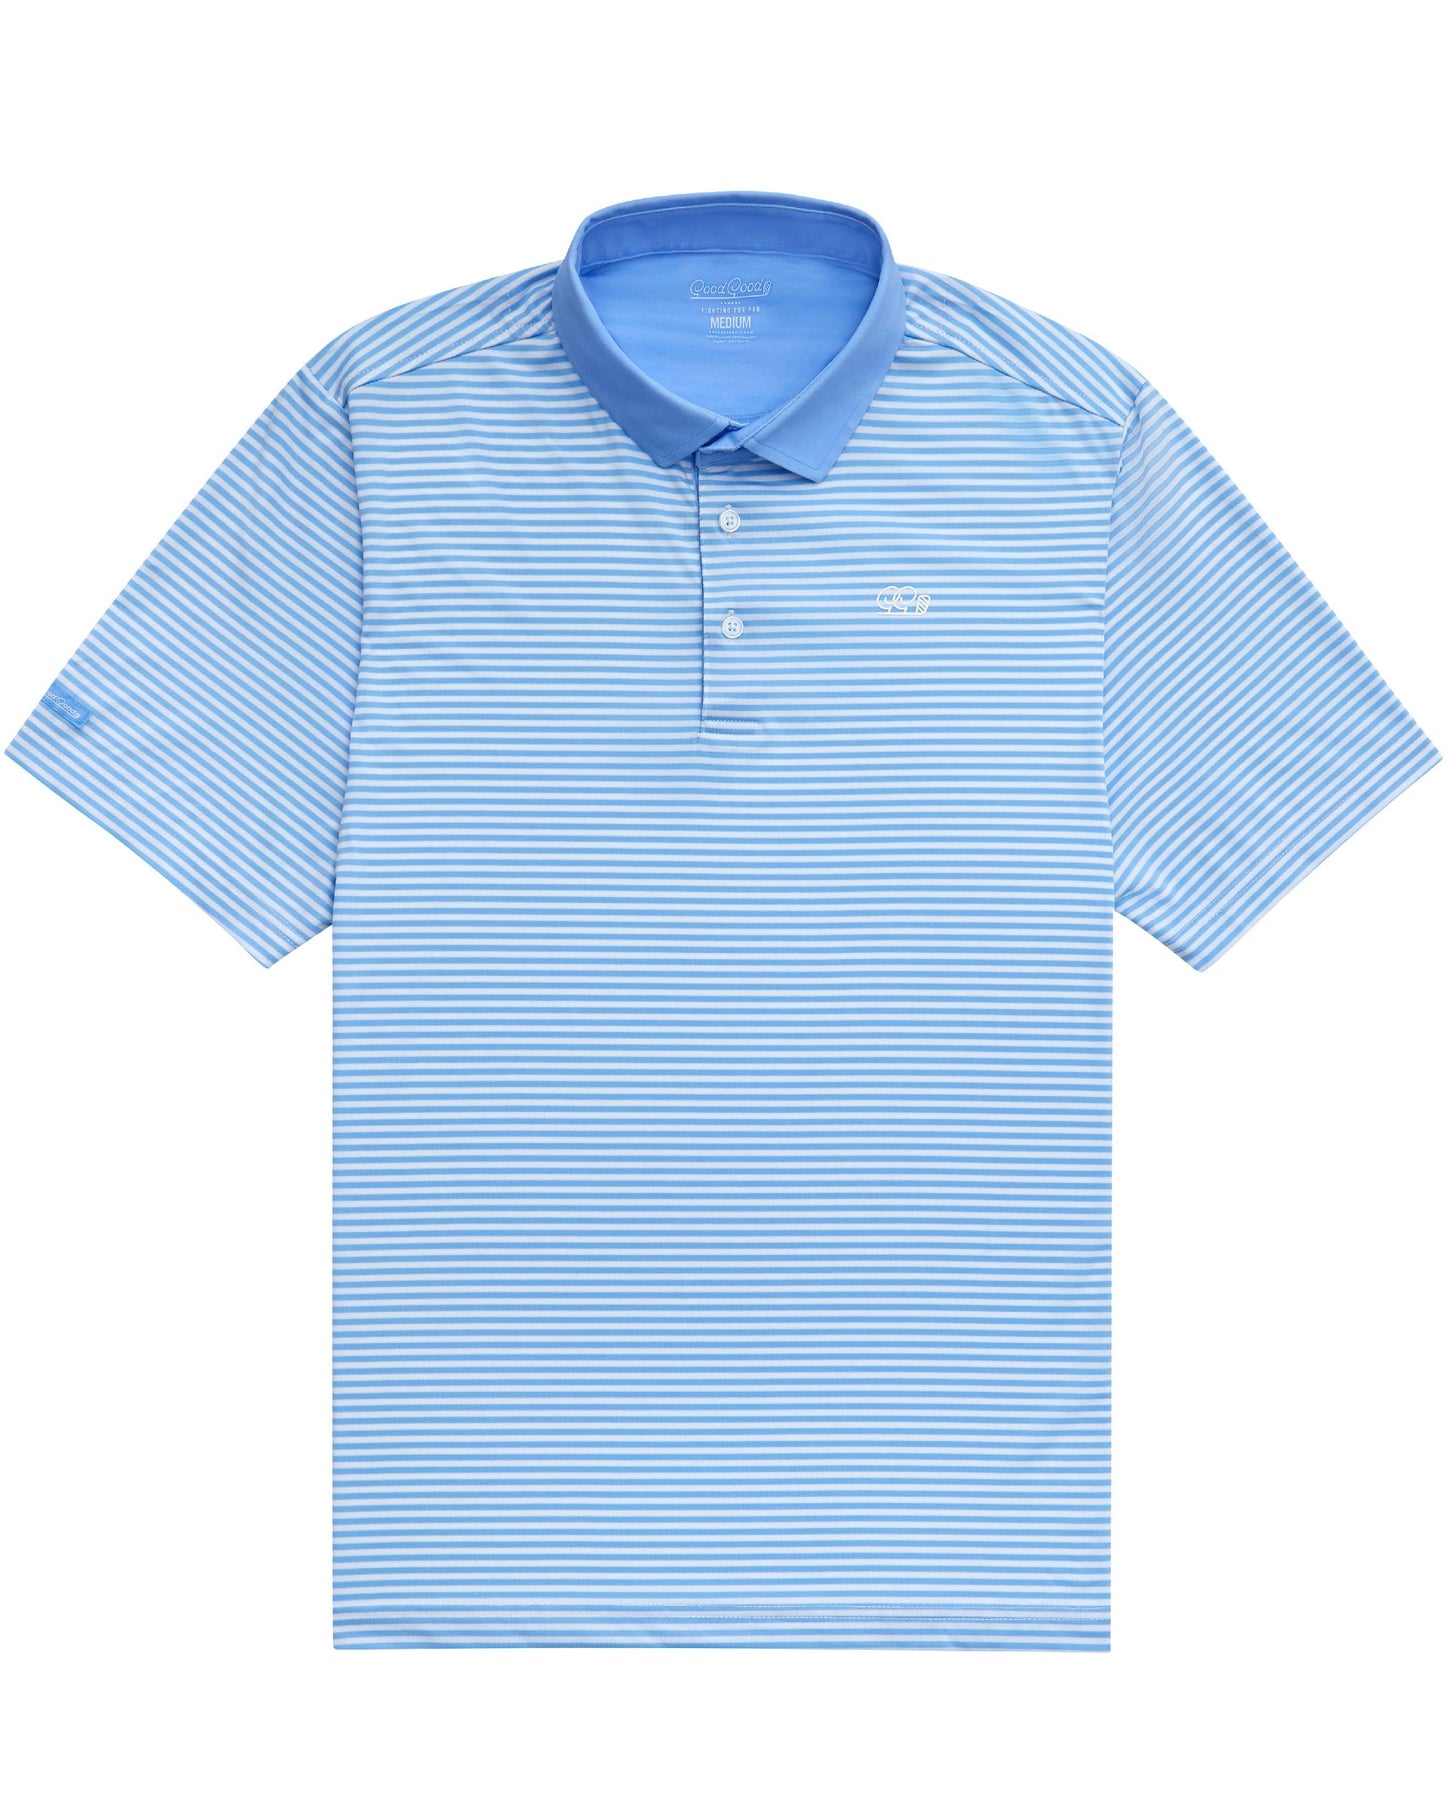 Gentleman's Polo - Spring Performance Polo by Good Good